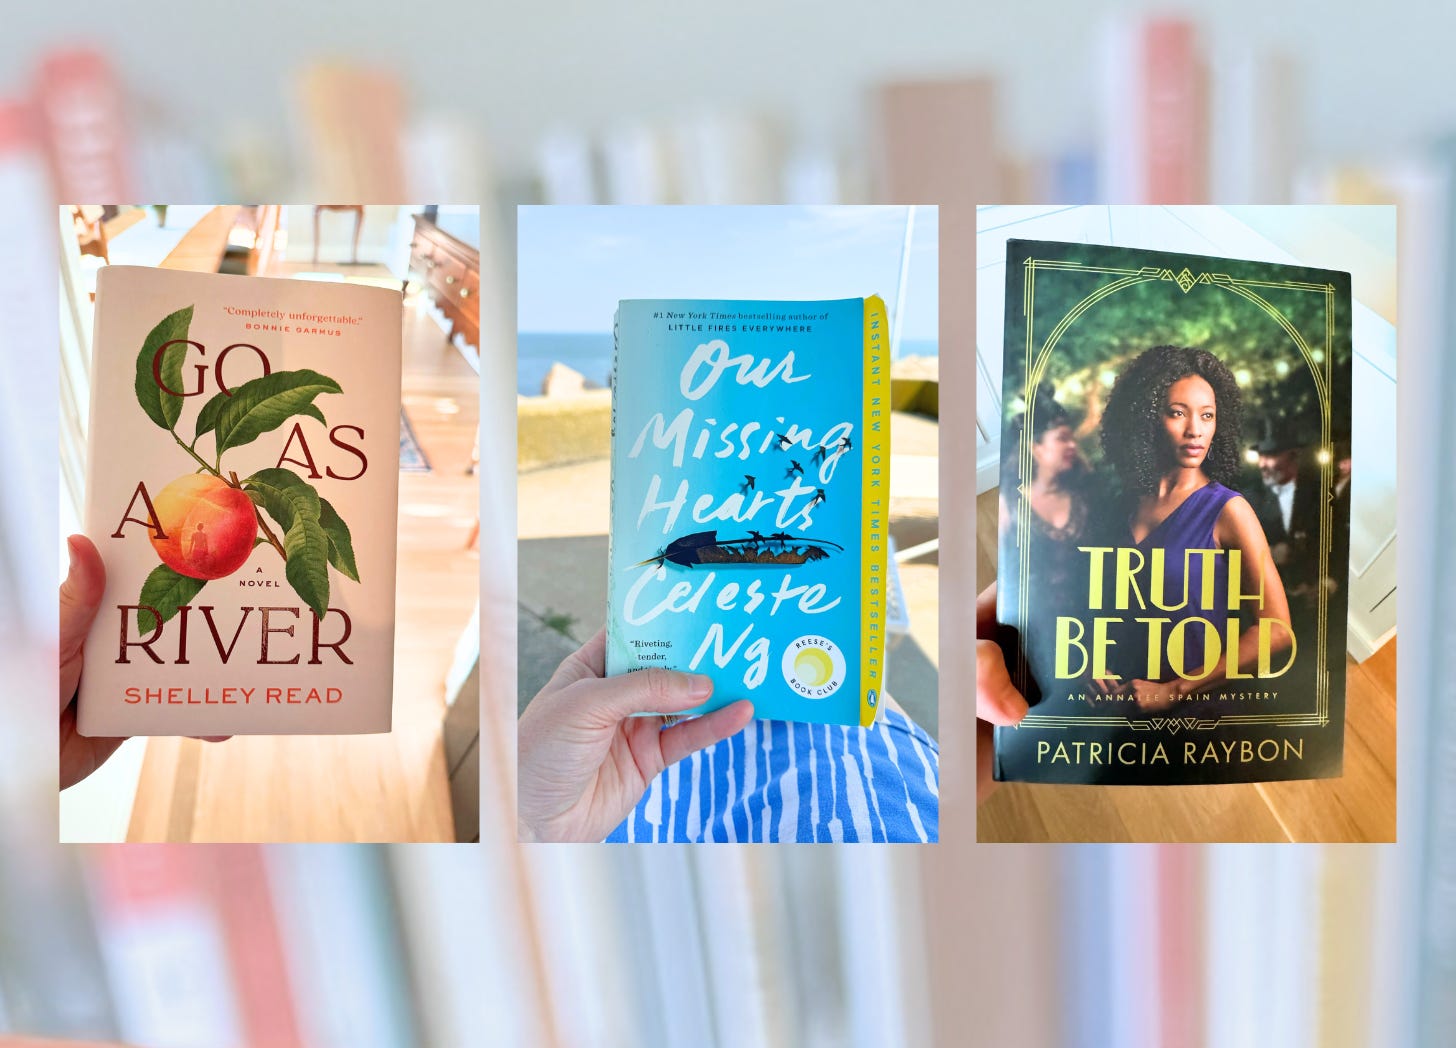 blurred bookshelves in the background with three book photos featured of: Go as a River, Our Missings Hearts, and Truth Be Told